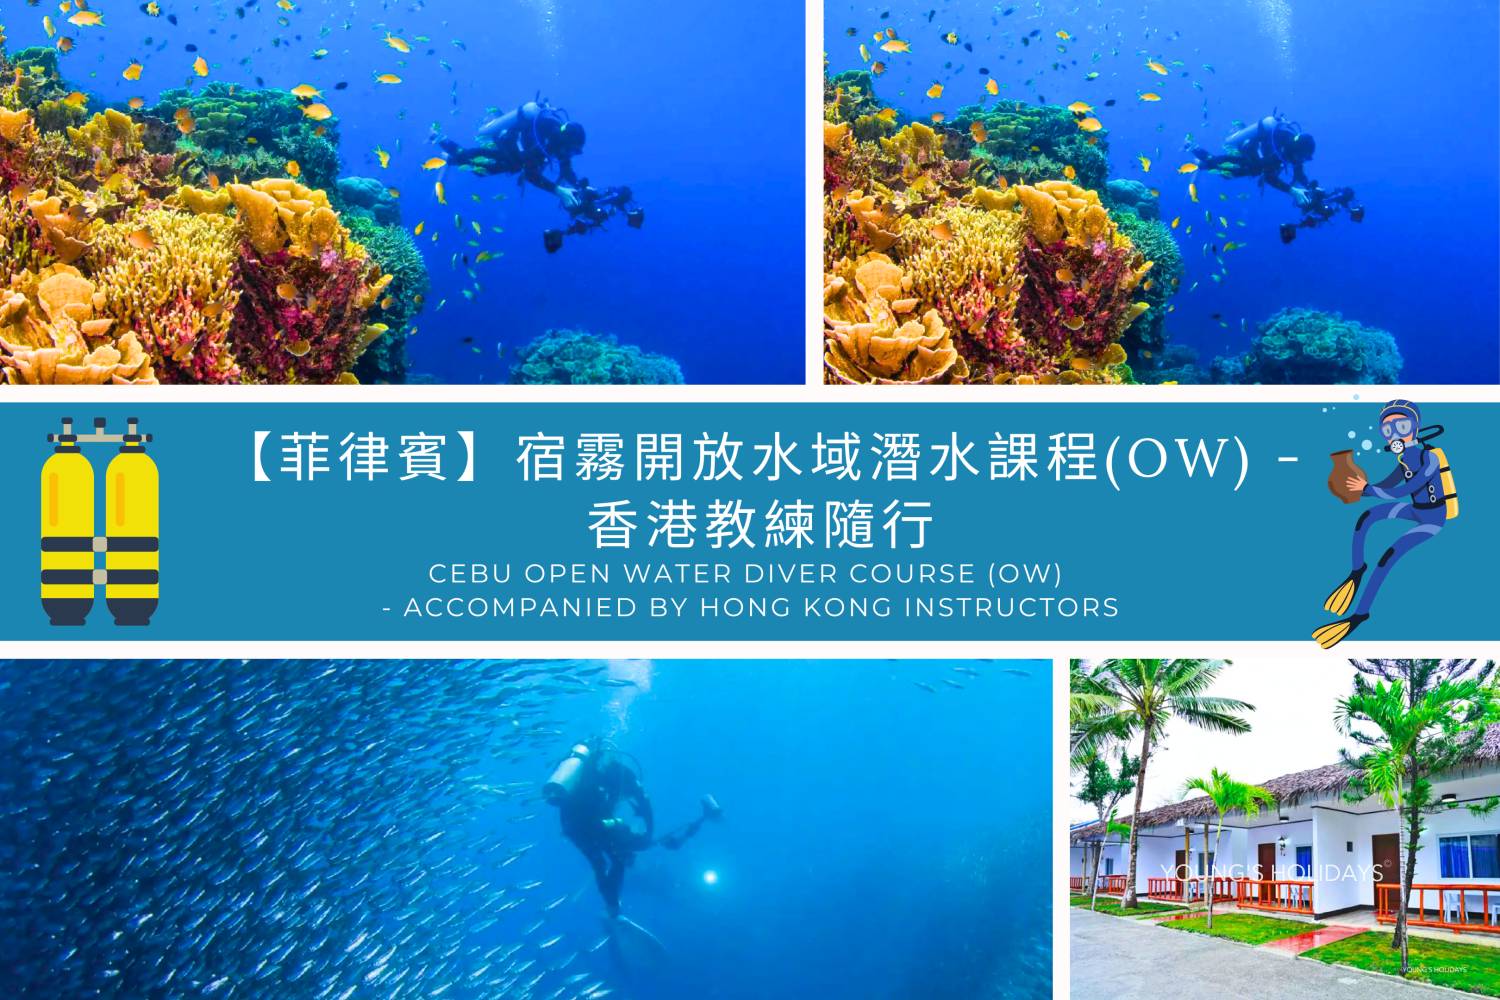 【Philippines】Cebu Open Water Diver Course (OW) - accompanied by Hong Kong instructors